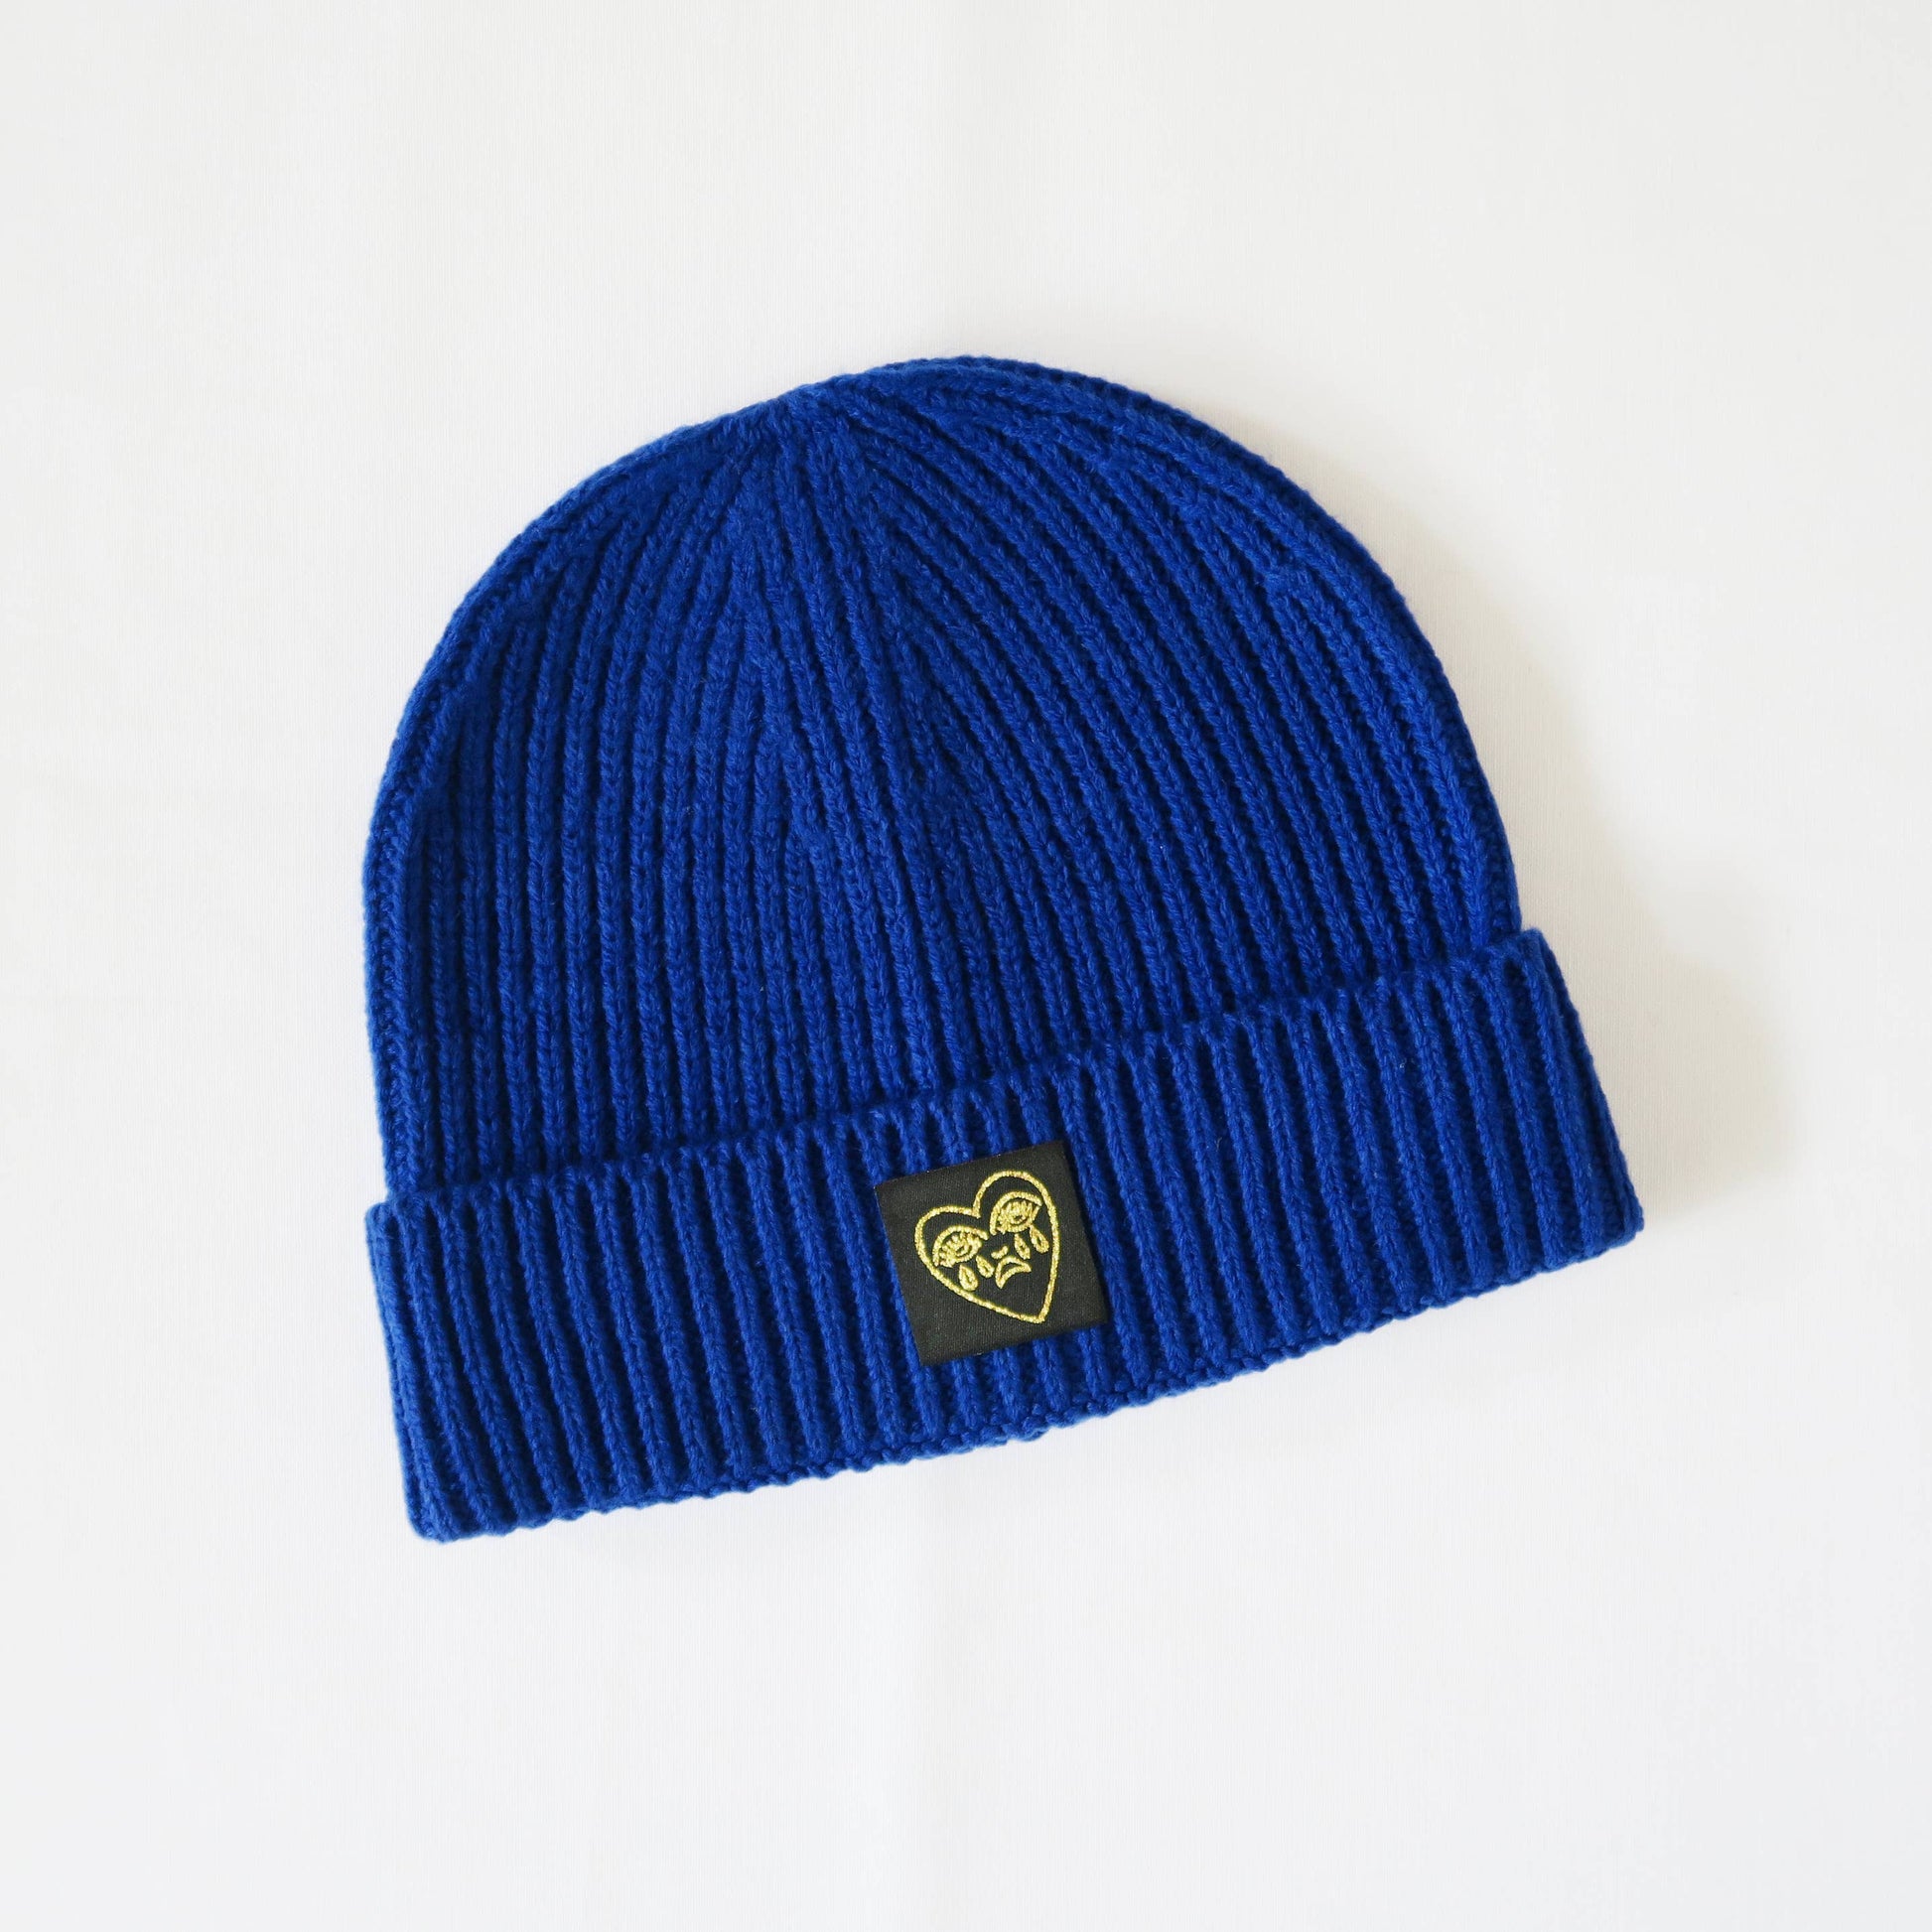 Crying Heart Ribbed Beanie Hat - Royal Blue